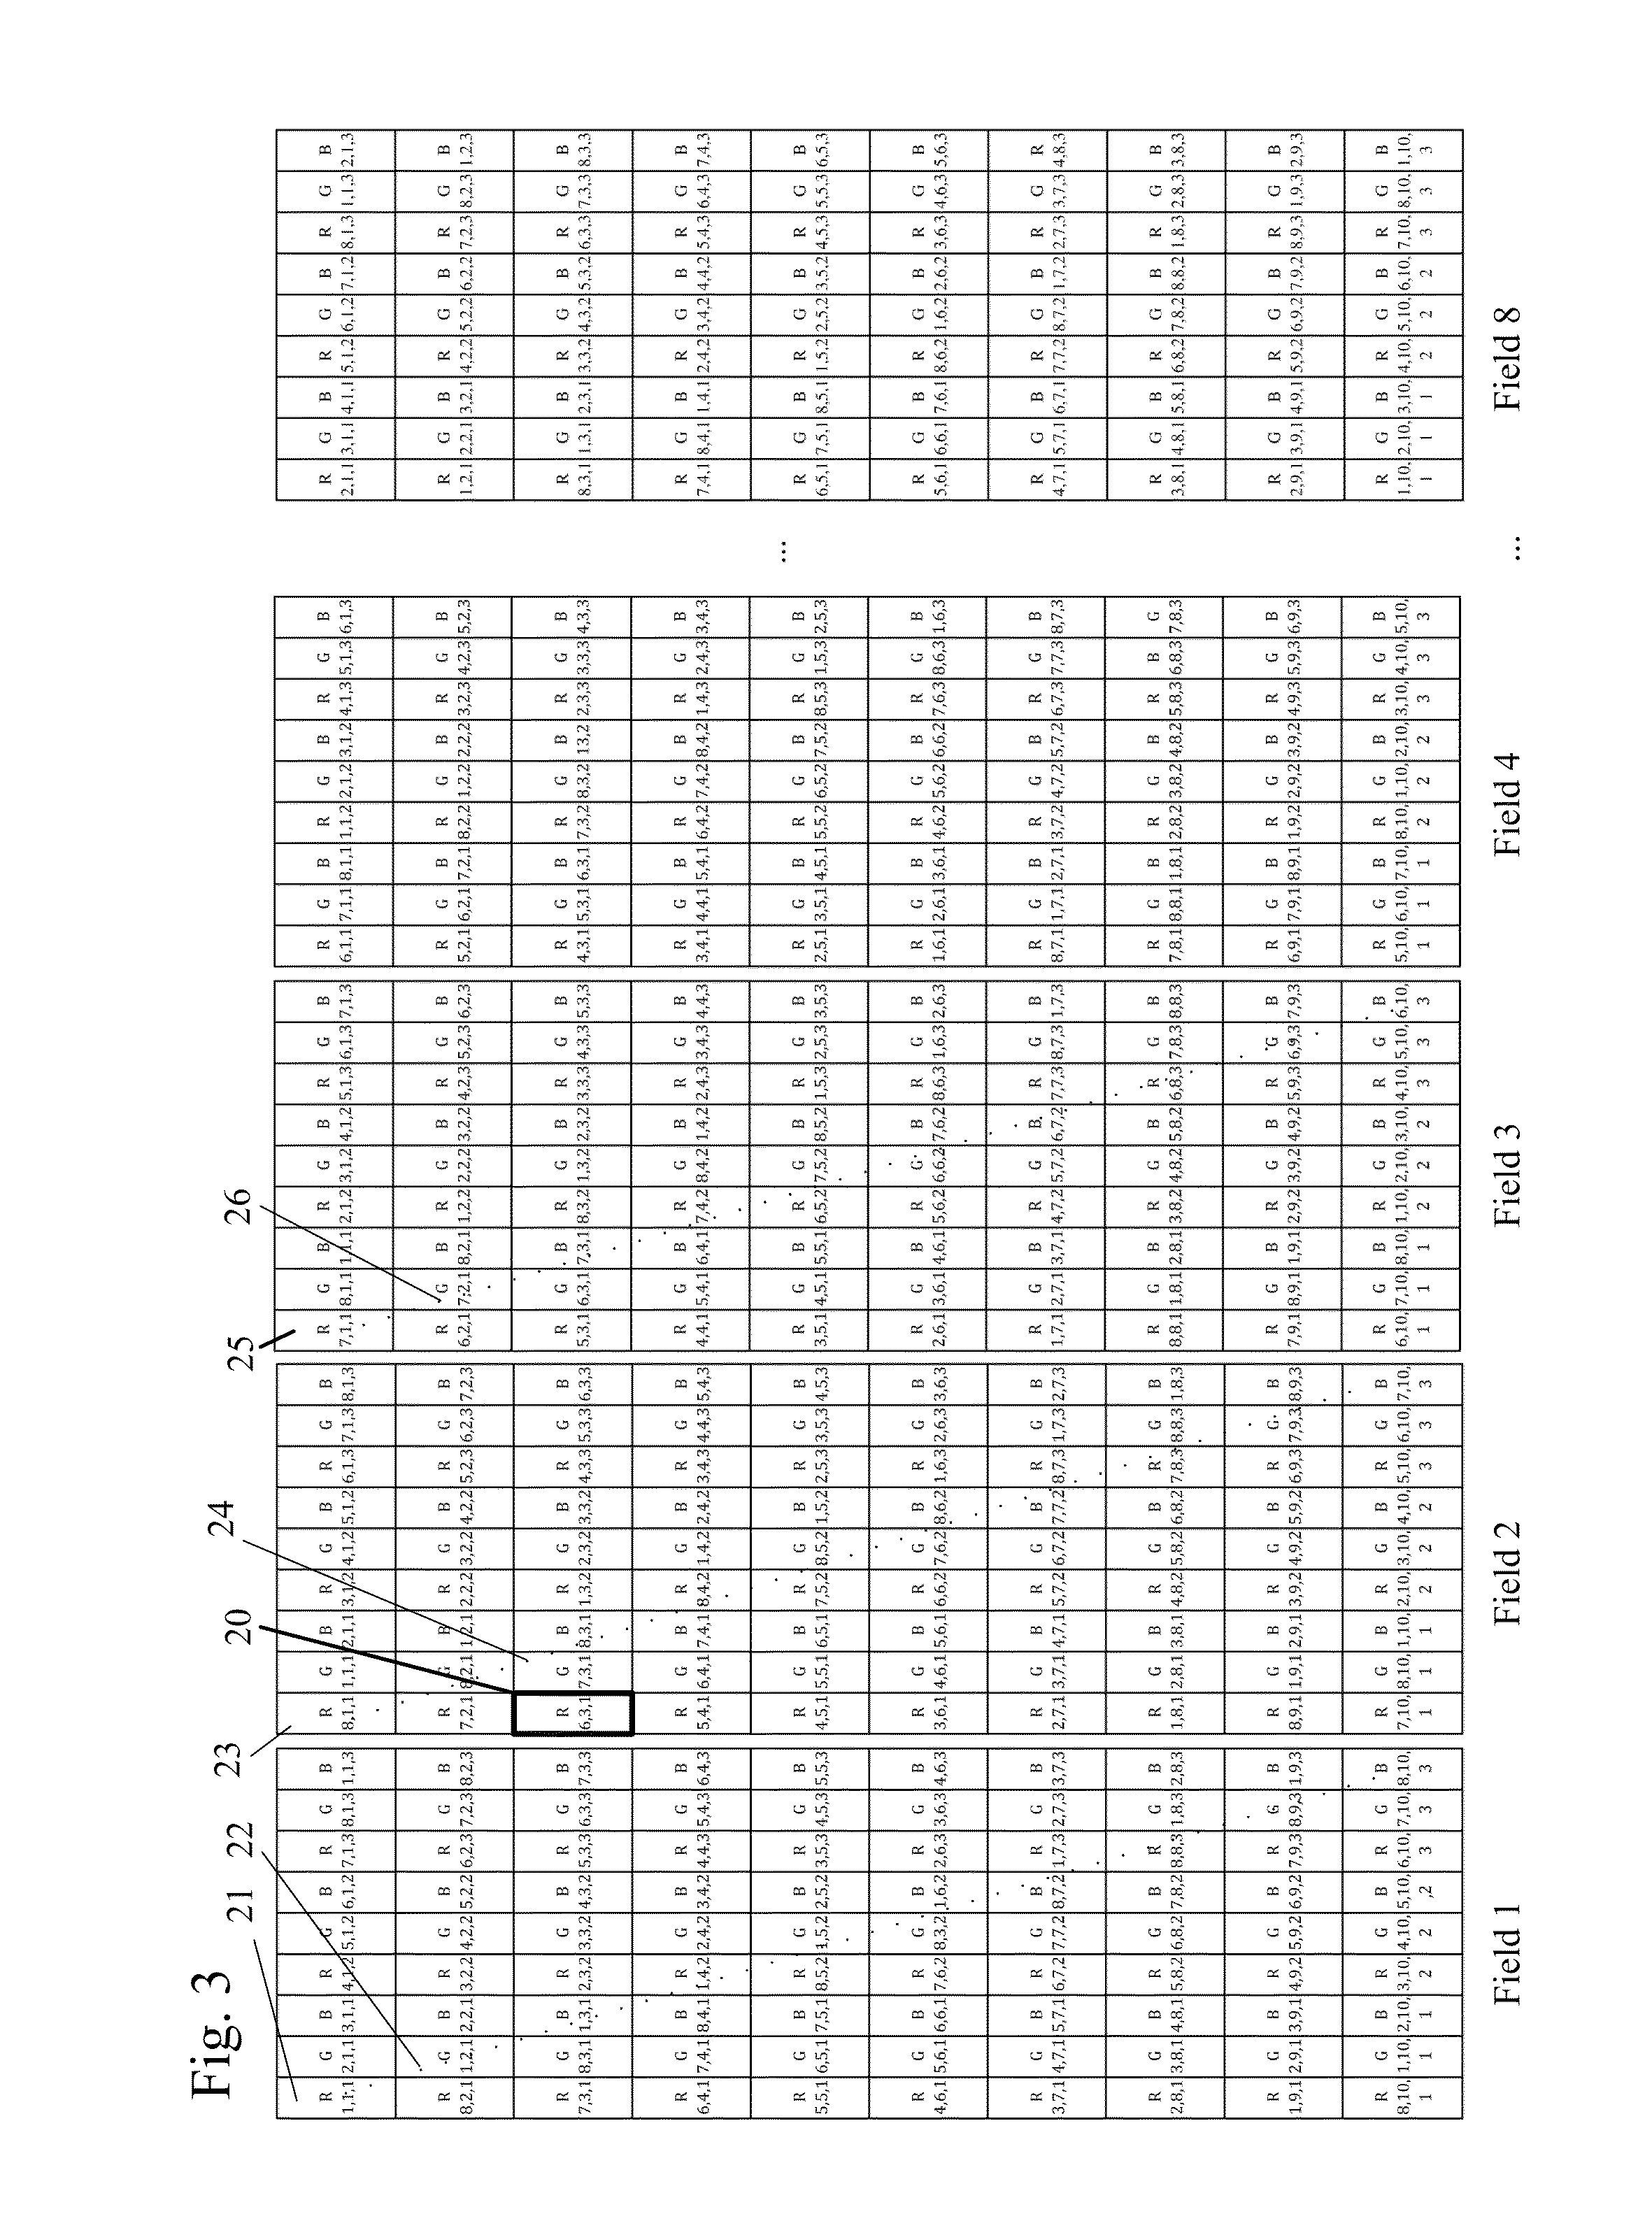 Image data placement method for a time multiplexed autostereoscopic display